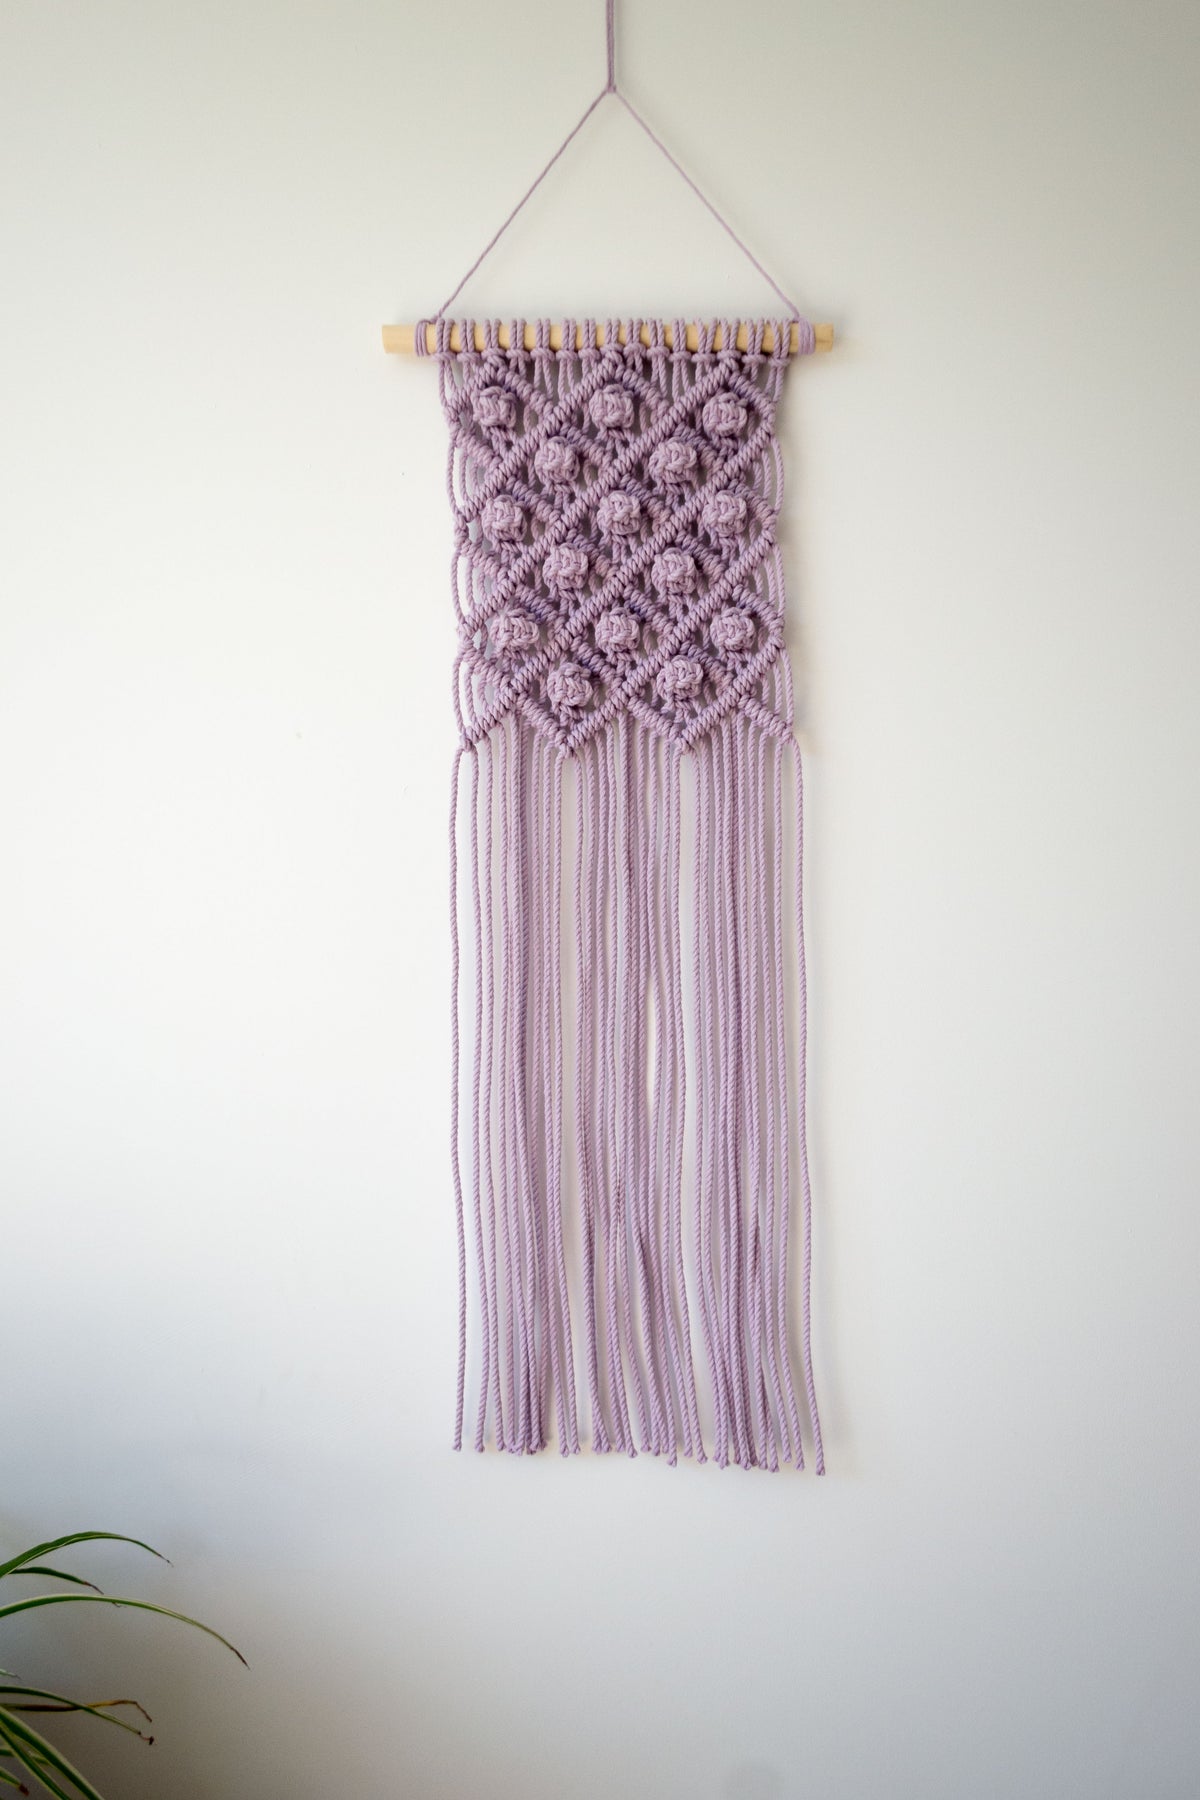 Macrame Wall Hanging &#39;Berry&#39; - DIY KIT - Available in multiple color variations